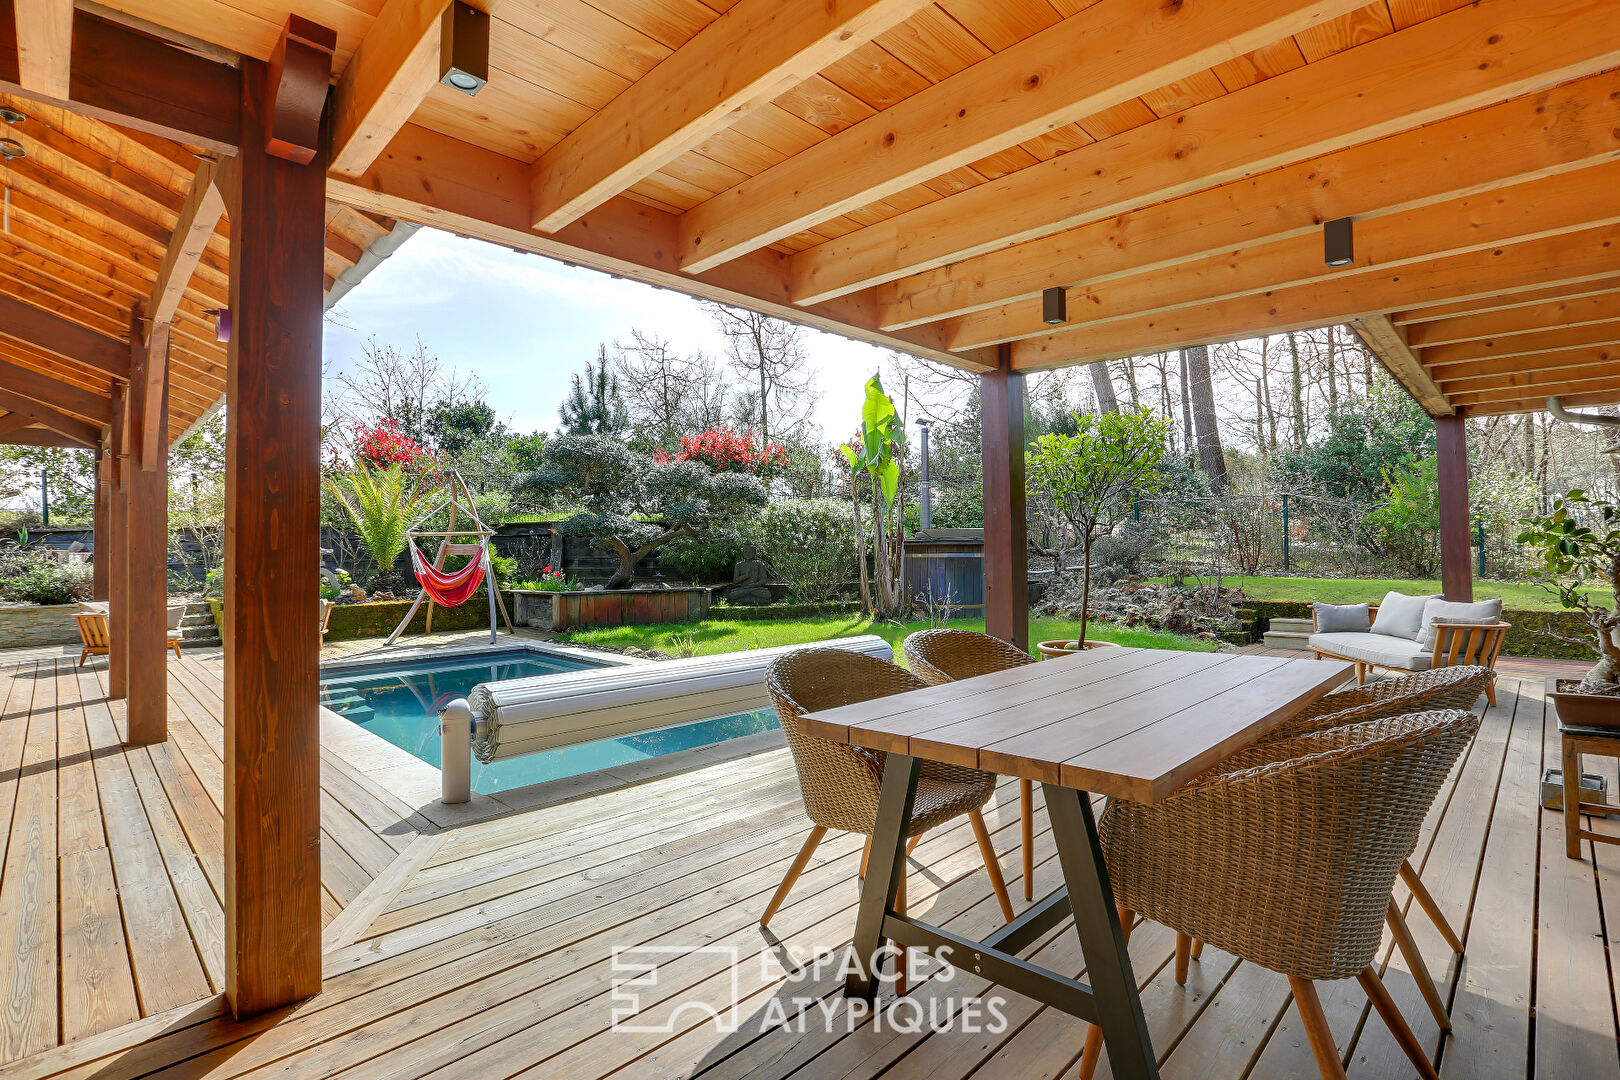 Contemporary villa 200 meters from the lake with swimming pool and its view of the pines.